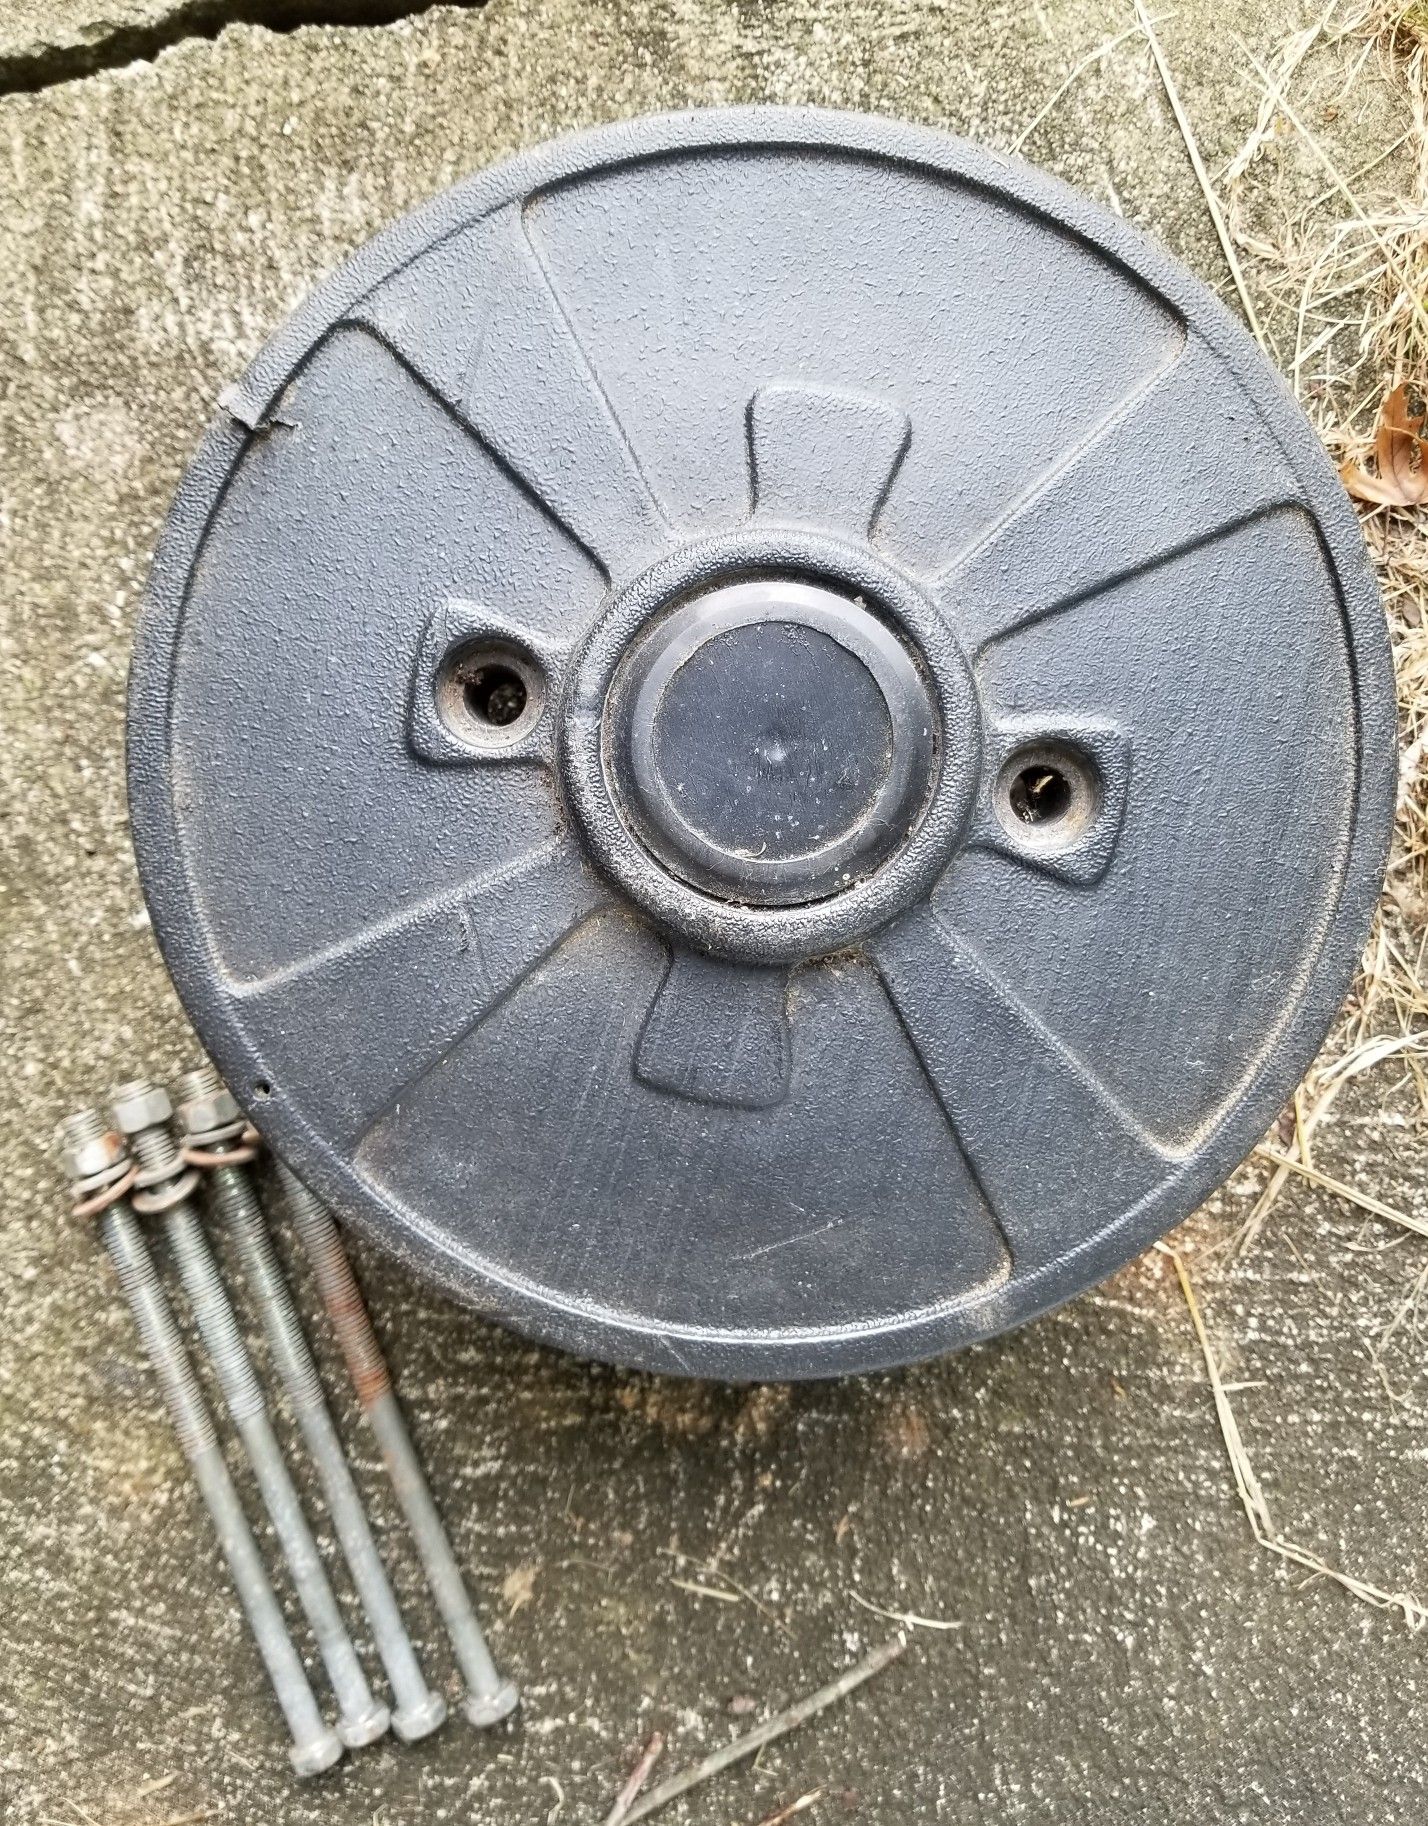 Lawn Tractor Wheel Weights